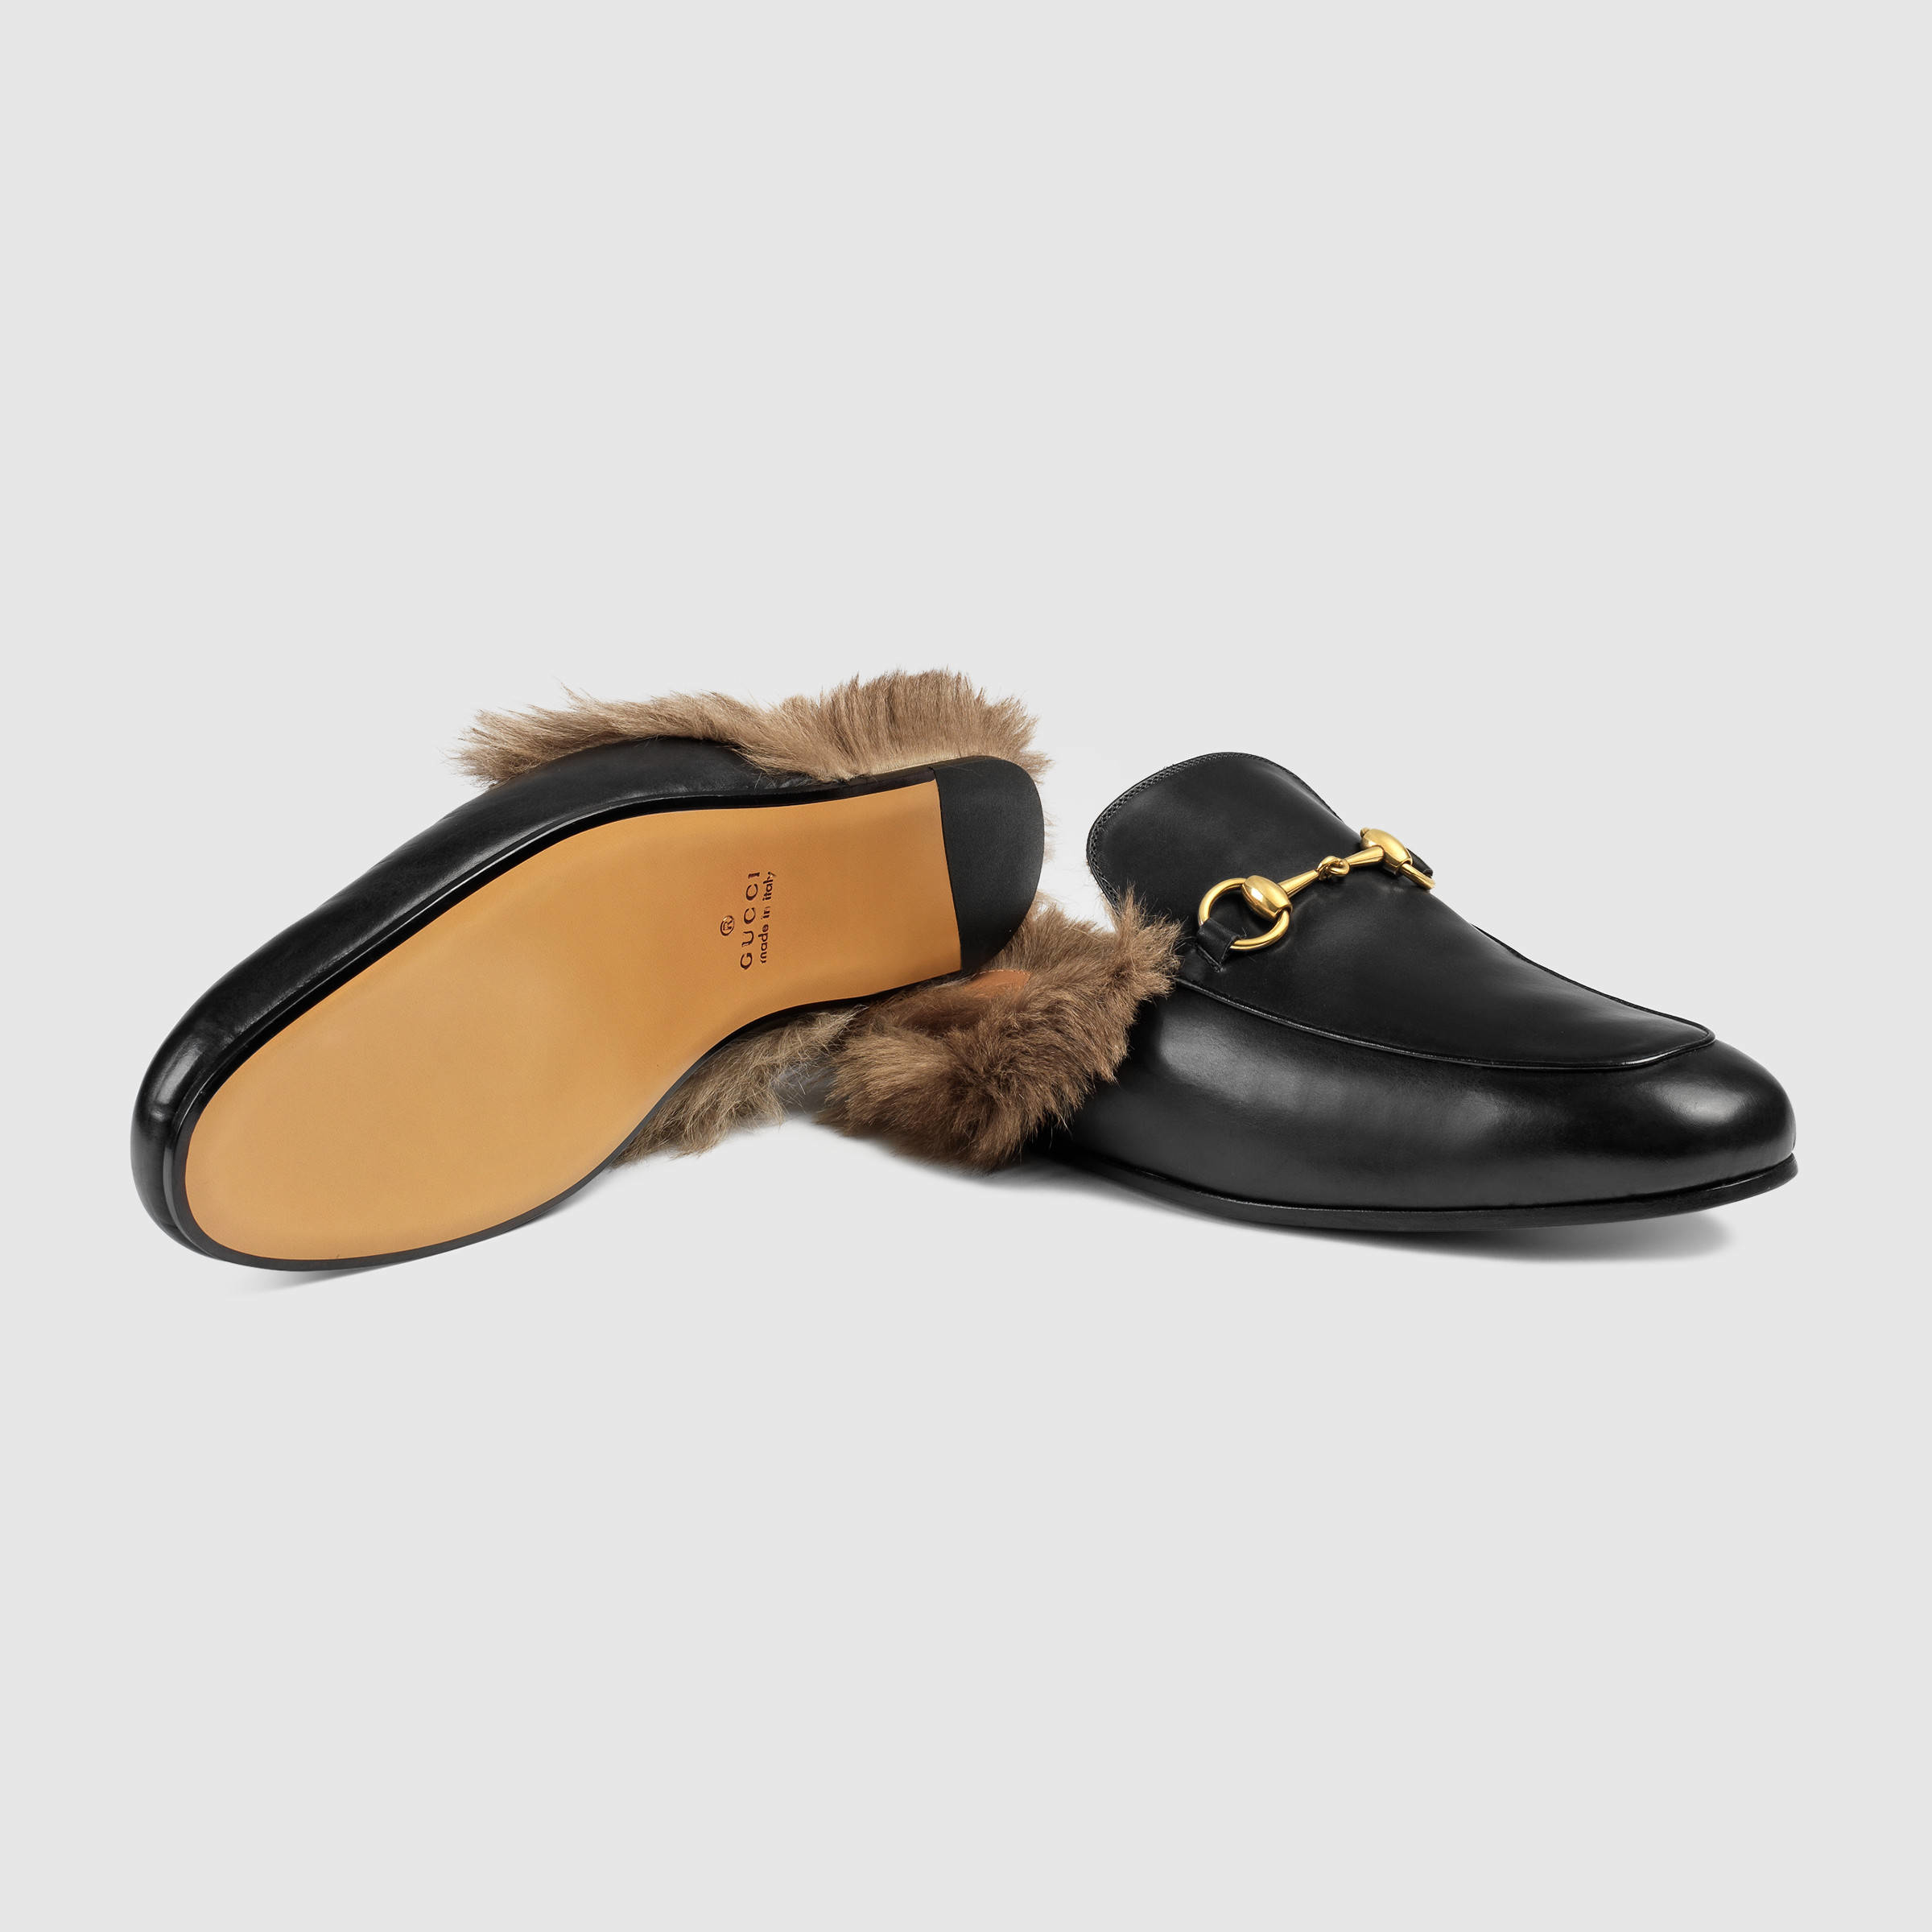 Lyst - Gucci Princetown Leather Slipper in Black for Men